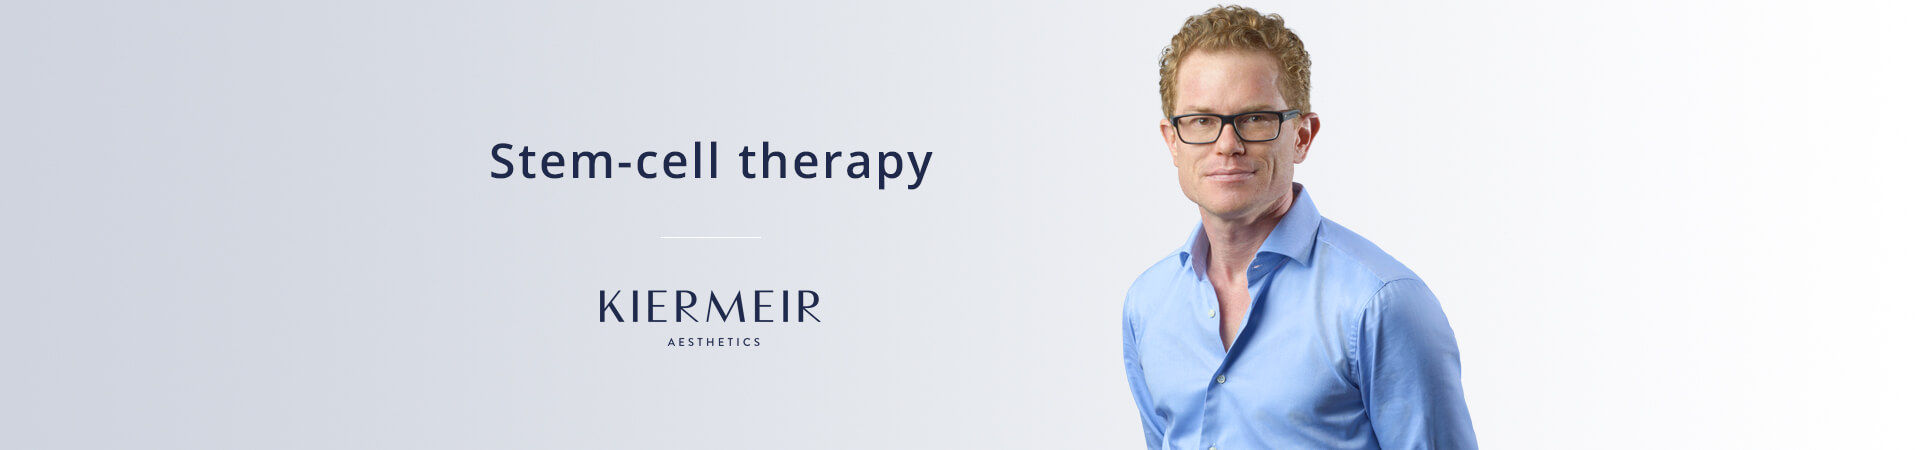 Stem Cell Therapy in Bern by Dr. Kiermeir 